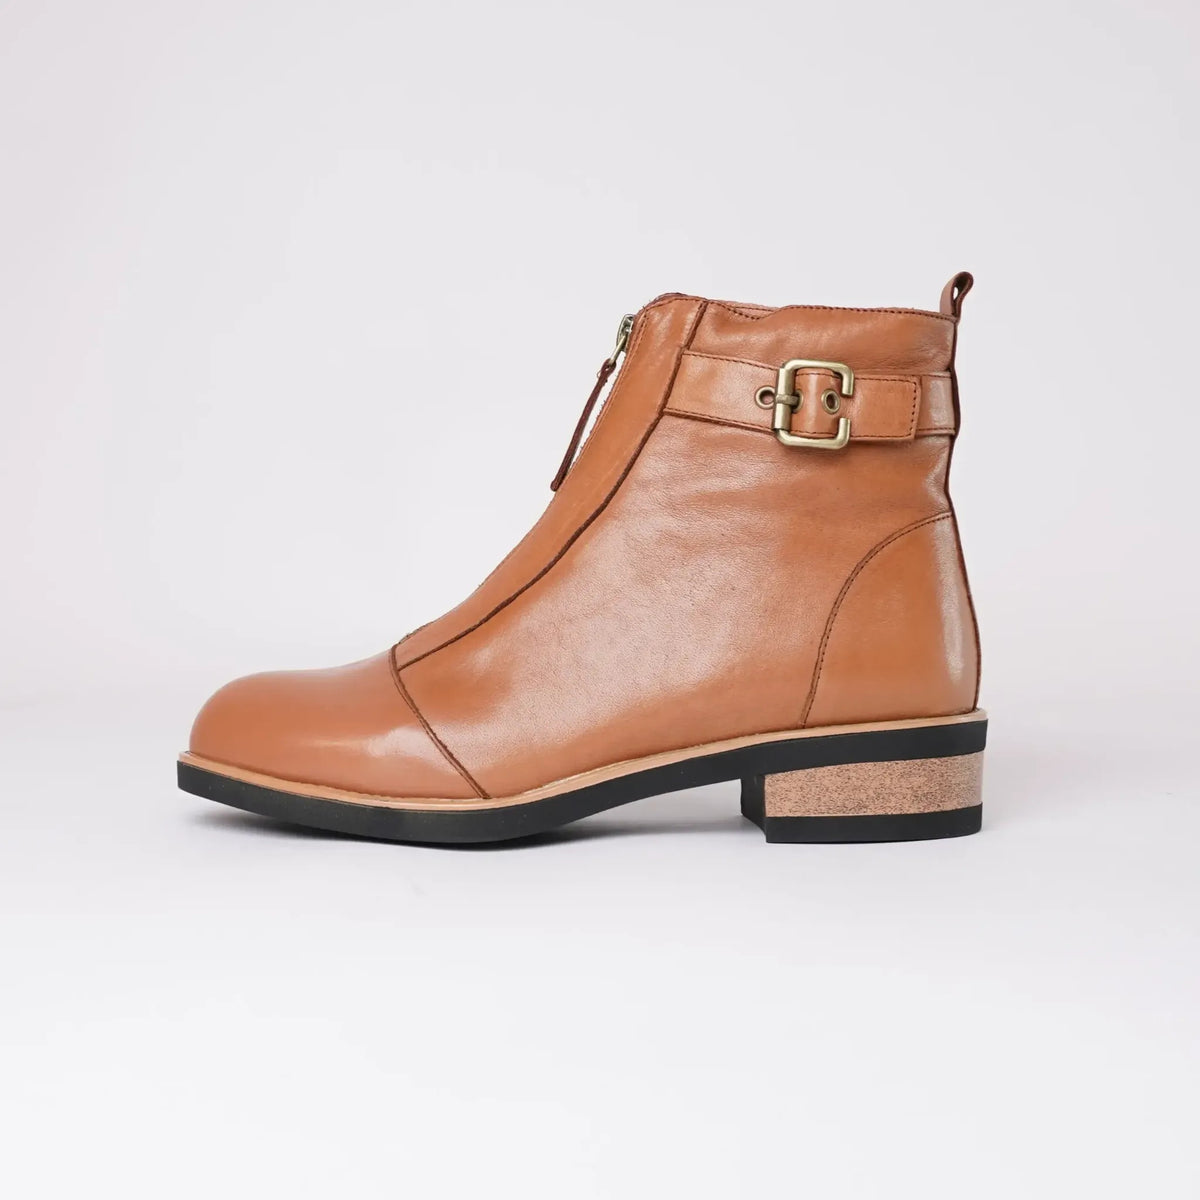 Dooley Brandy Leather Ankle Boots